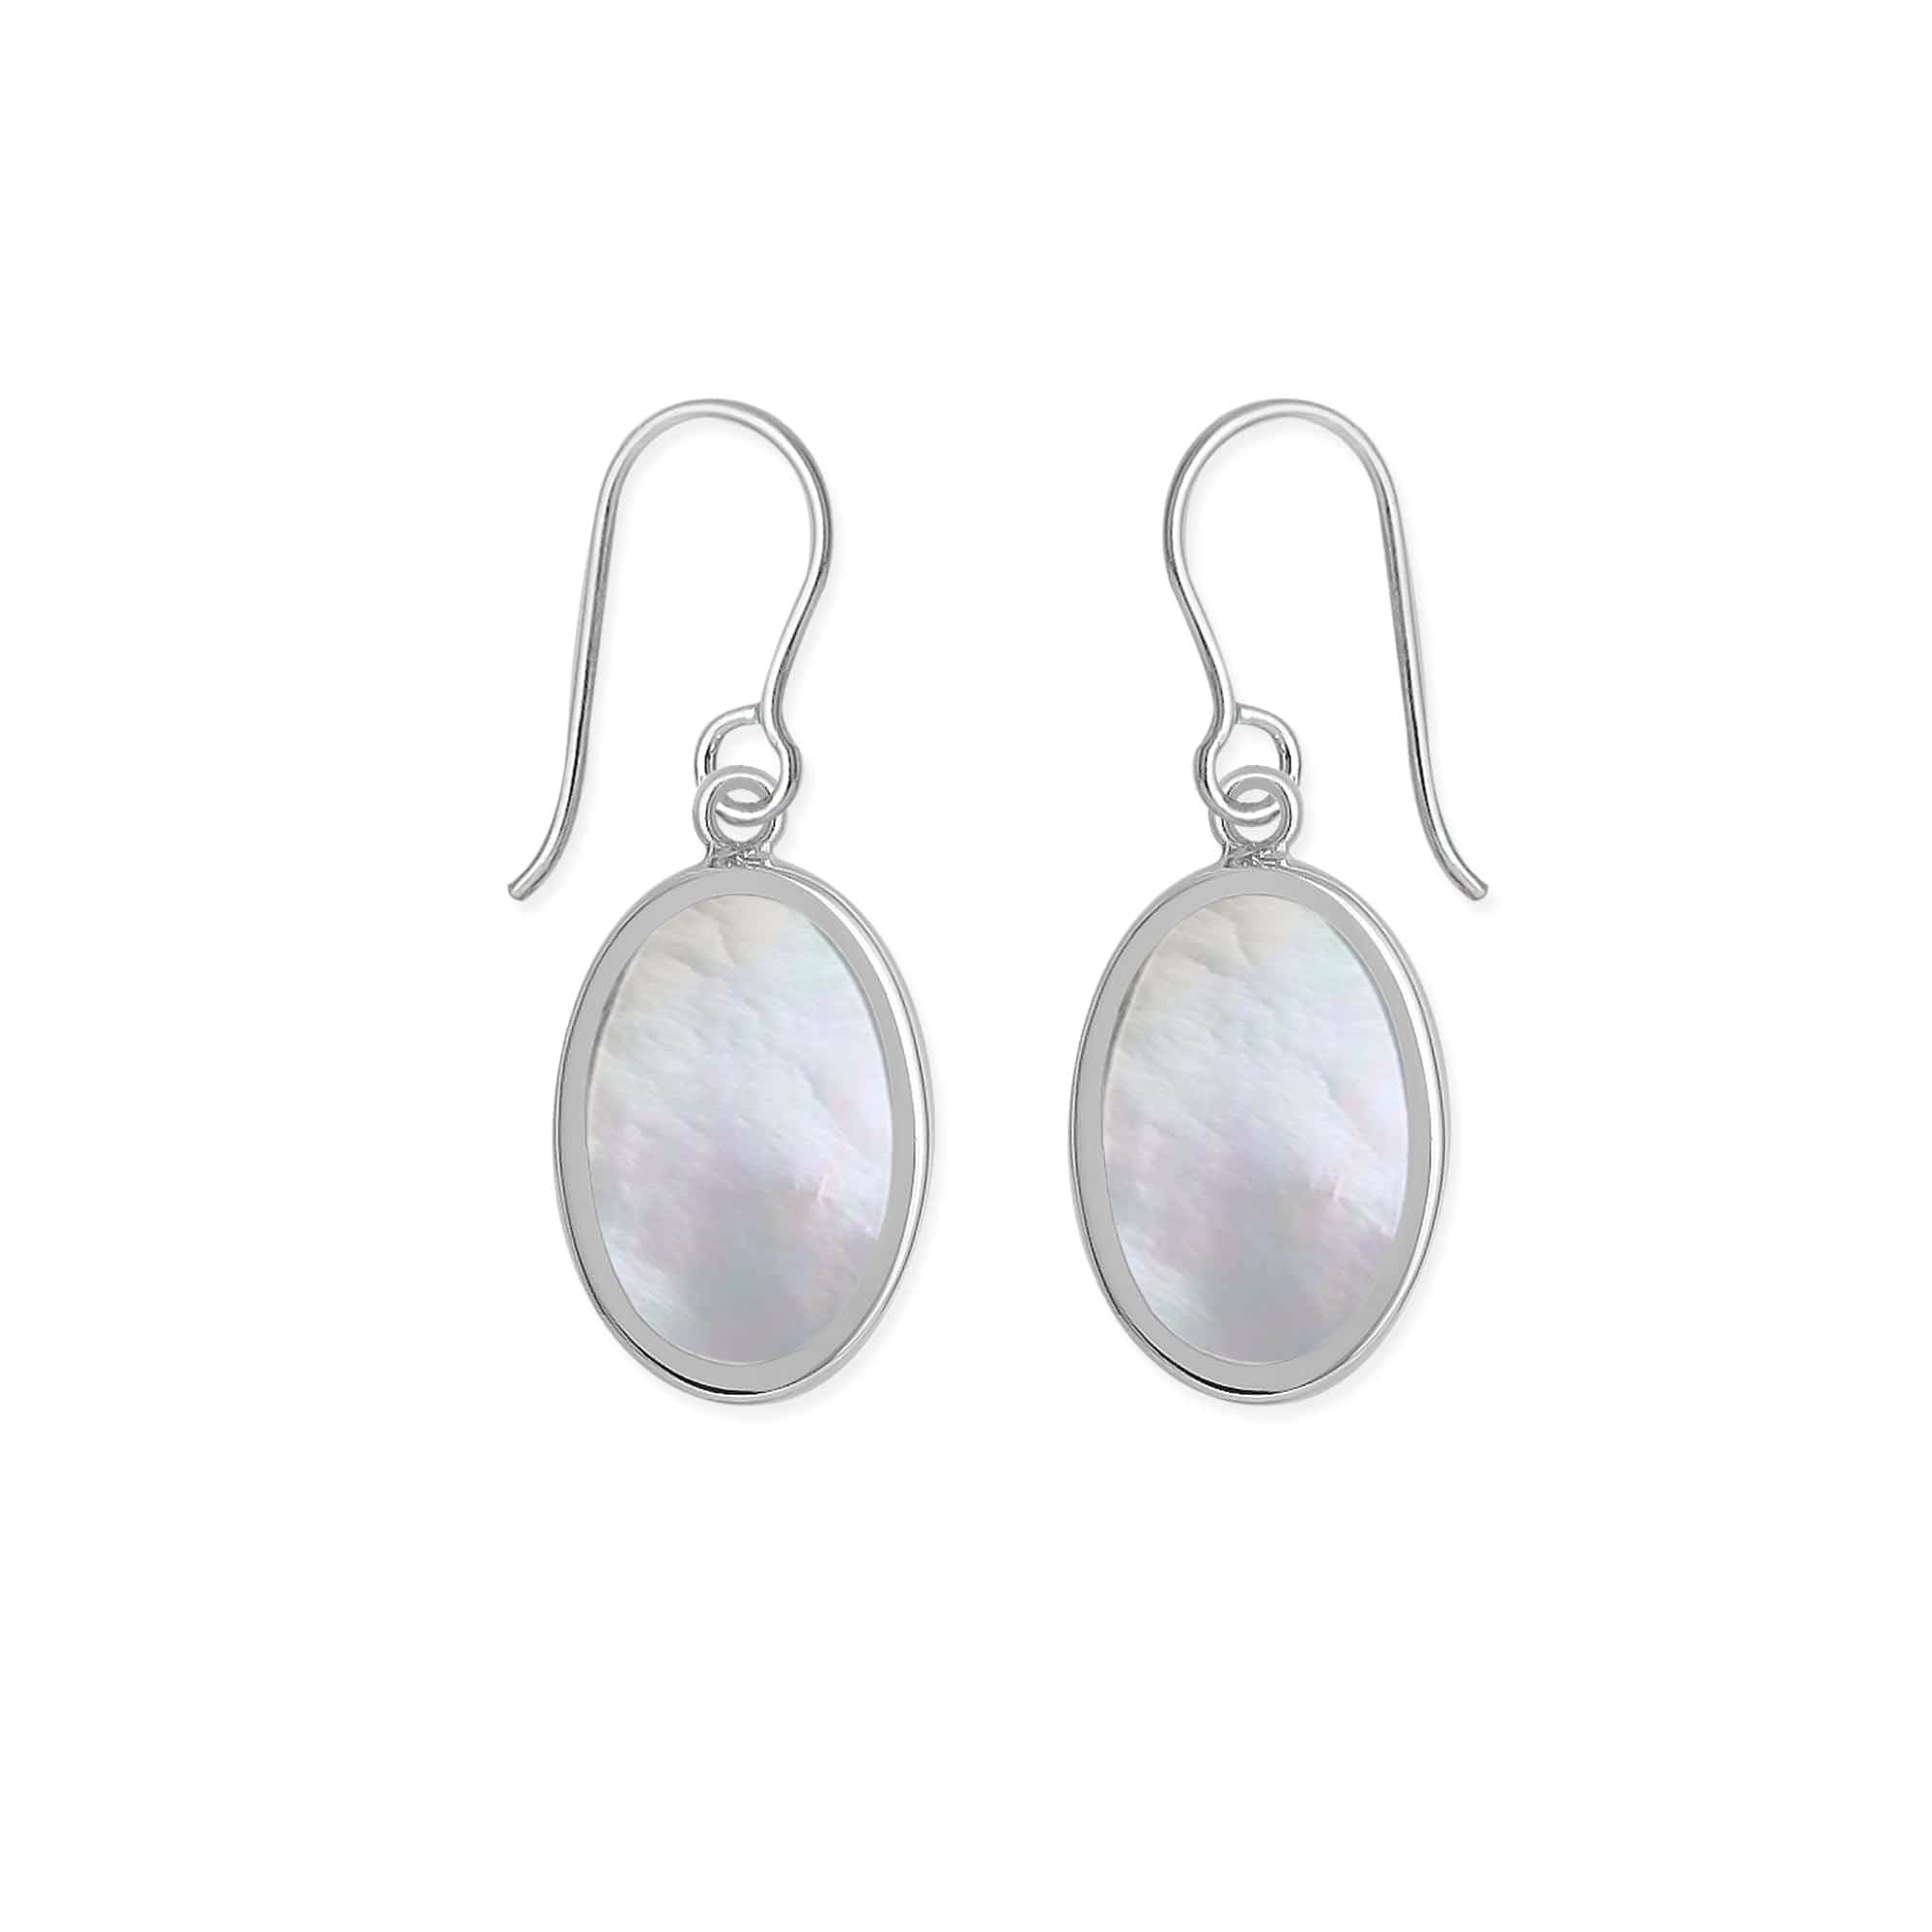 Boma Jewelry Earrings Mother of Pearl Alina Oval Bezel Earrings with Stone